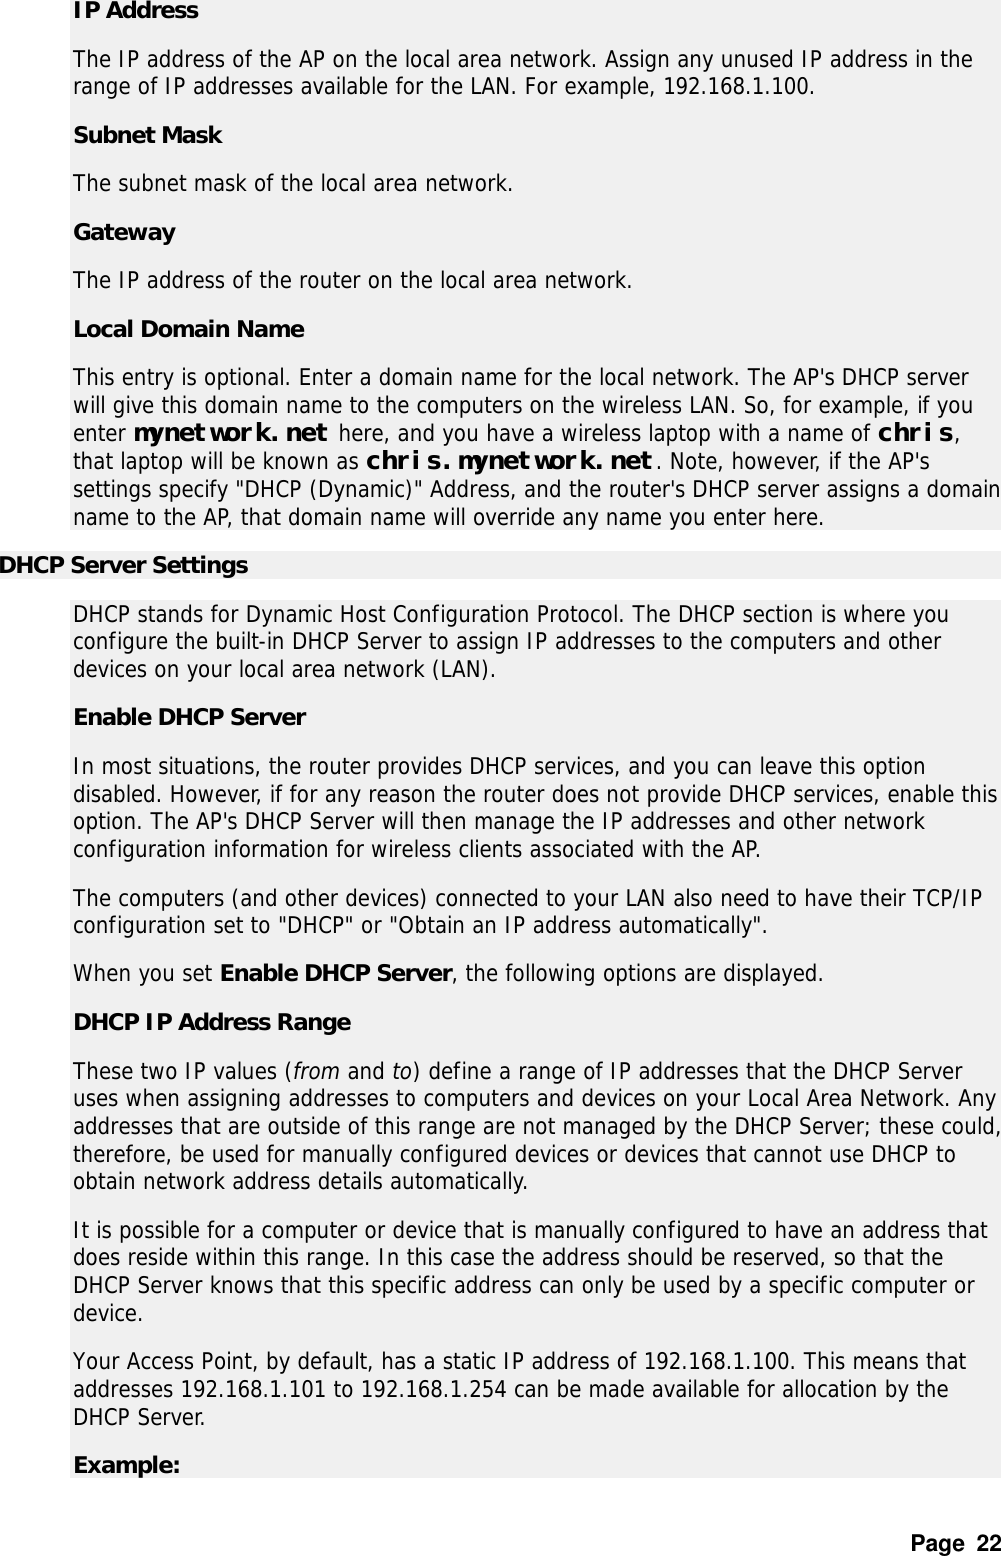 Page  22 IP Address   The IP address of the AP on the local area network. Assign any unused IP address in the range of IP addresses available for the LAN. For example, 192.168.1.100.  Subnet Mask   The subnet mask of the local area network.  Gateway   The IP address of the router on the local area network.  Local Domain Name   This entry is optional. Enter a domain name for the local network. The AP&apos;s DHCP server will give this domain name to the computers on the wireless LAN. So, for example, if you enter mynetwork.net here, and you have a wireless laptop with a name of chris, that laptop will be known as chris.mynetwork.net. Note, however, if the AP&apos;s settings specify &quot;DHCP (Dynamic)&quot; Address, and the router&apos;s DHCP server assigns a domain name to the AP, that domain name will override any name you enter here.  DHCP Server Settings   DHCP stands for Dynamic Host Configuration Protocol. The DHCP section is where you configure the built-in DHCP Server to assign IP addresses to the computers and other devices on your local area network (LAN).  Enable DHCP Server   In most situations, the router provides DHCP services, and you can leave this option disabled. However, if for any reason the router does not provide DHCP services, enable this option. The AP&apos;s DHCP Server will then manage the IP addresses and other network configuration information for wireless clients associated with the AP.  The computers (and other devices) connected to your LAN also need to have their TCP/IP configuration set to &quot;DHCP&quot; or &quot;Obtain an IP address automatically&quot;.  When you set Enable DHCP Server, the following options are displayed.  DHCP IP Address Range   These two IP values (from and to) define a range of IP addresses that the DHCP Server uses when assigning addresses to computers and devices on your Local Area Network. Any addresses that are outside of this range are not managed by the DHCP Server; these could, therefore, be used for manually configured devices or devices that cannot use DHCP to obtain network address details automatically.  It is possible for a computer or device that is manually configured to have an address that does reside within this range. In this case the address should be reserved, so that the DHCP Server knows that this specific address can only be used by a specific computer or device.  Your Access Point, by default, has a static IP address of 192.168.1.100. This means that addresses 192.168.1.101 to 192.168.1.254 can be made available for allocation by the DHCP Server.  Example:   